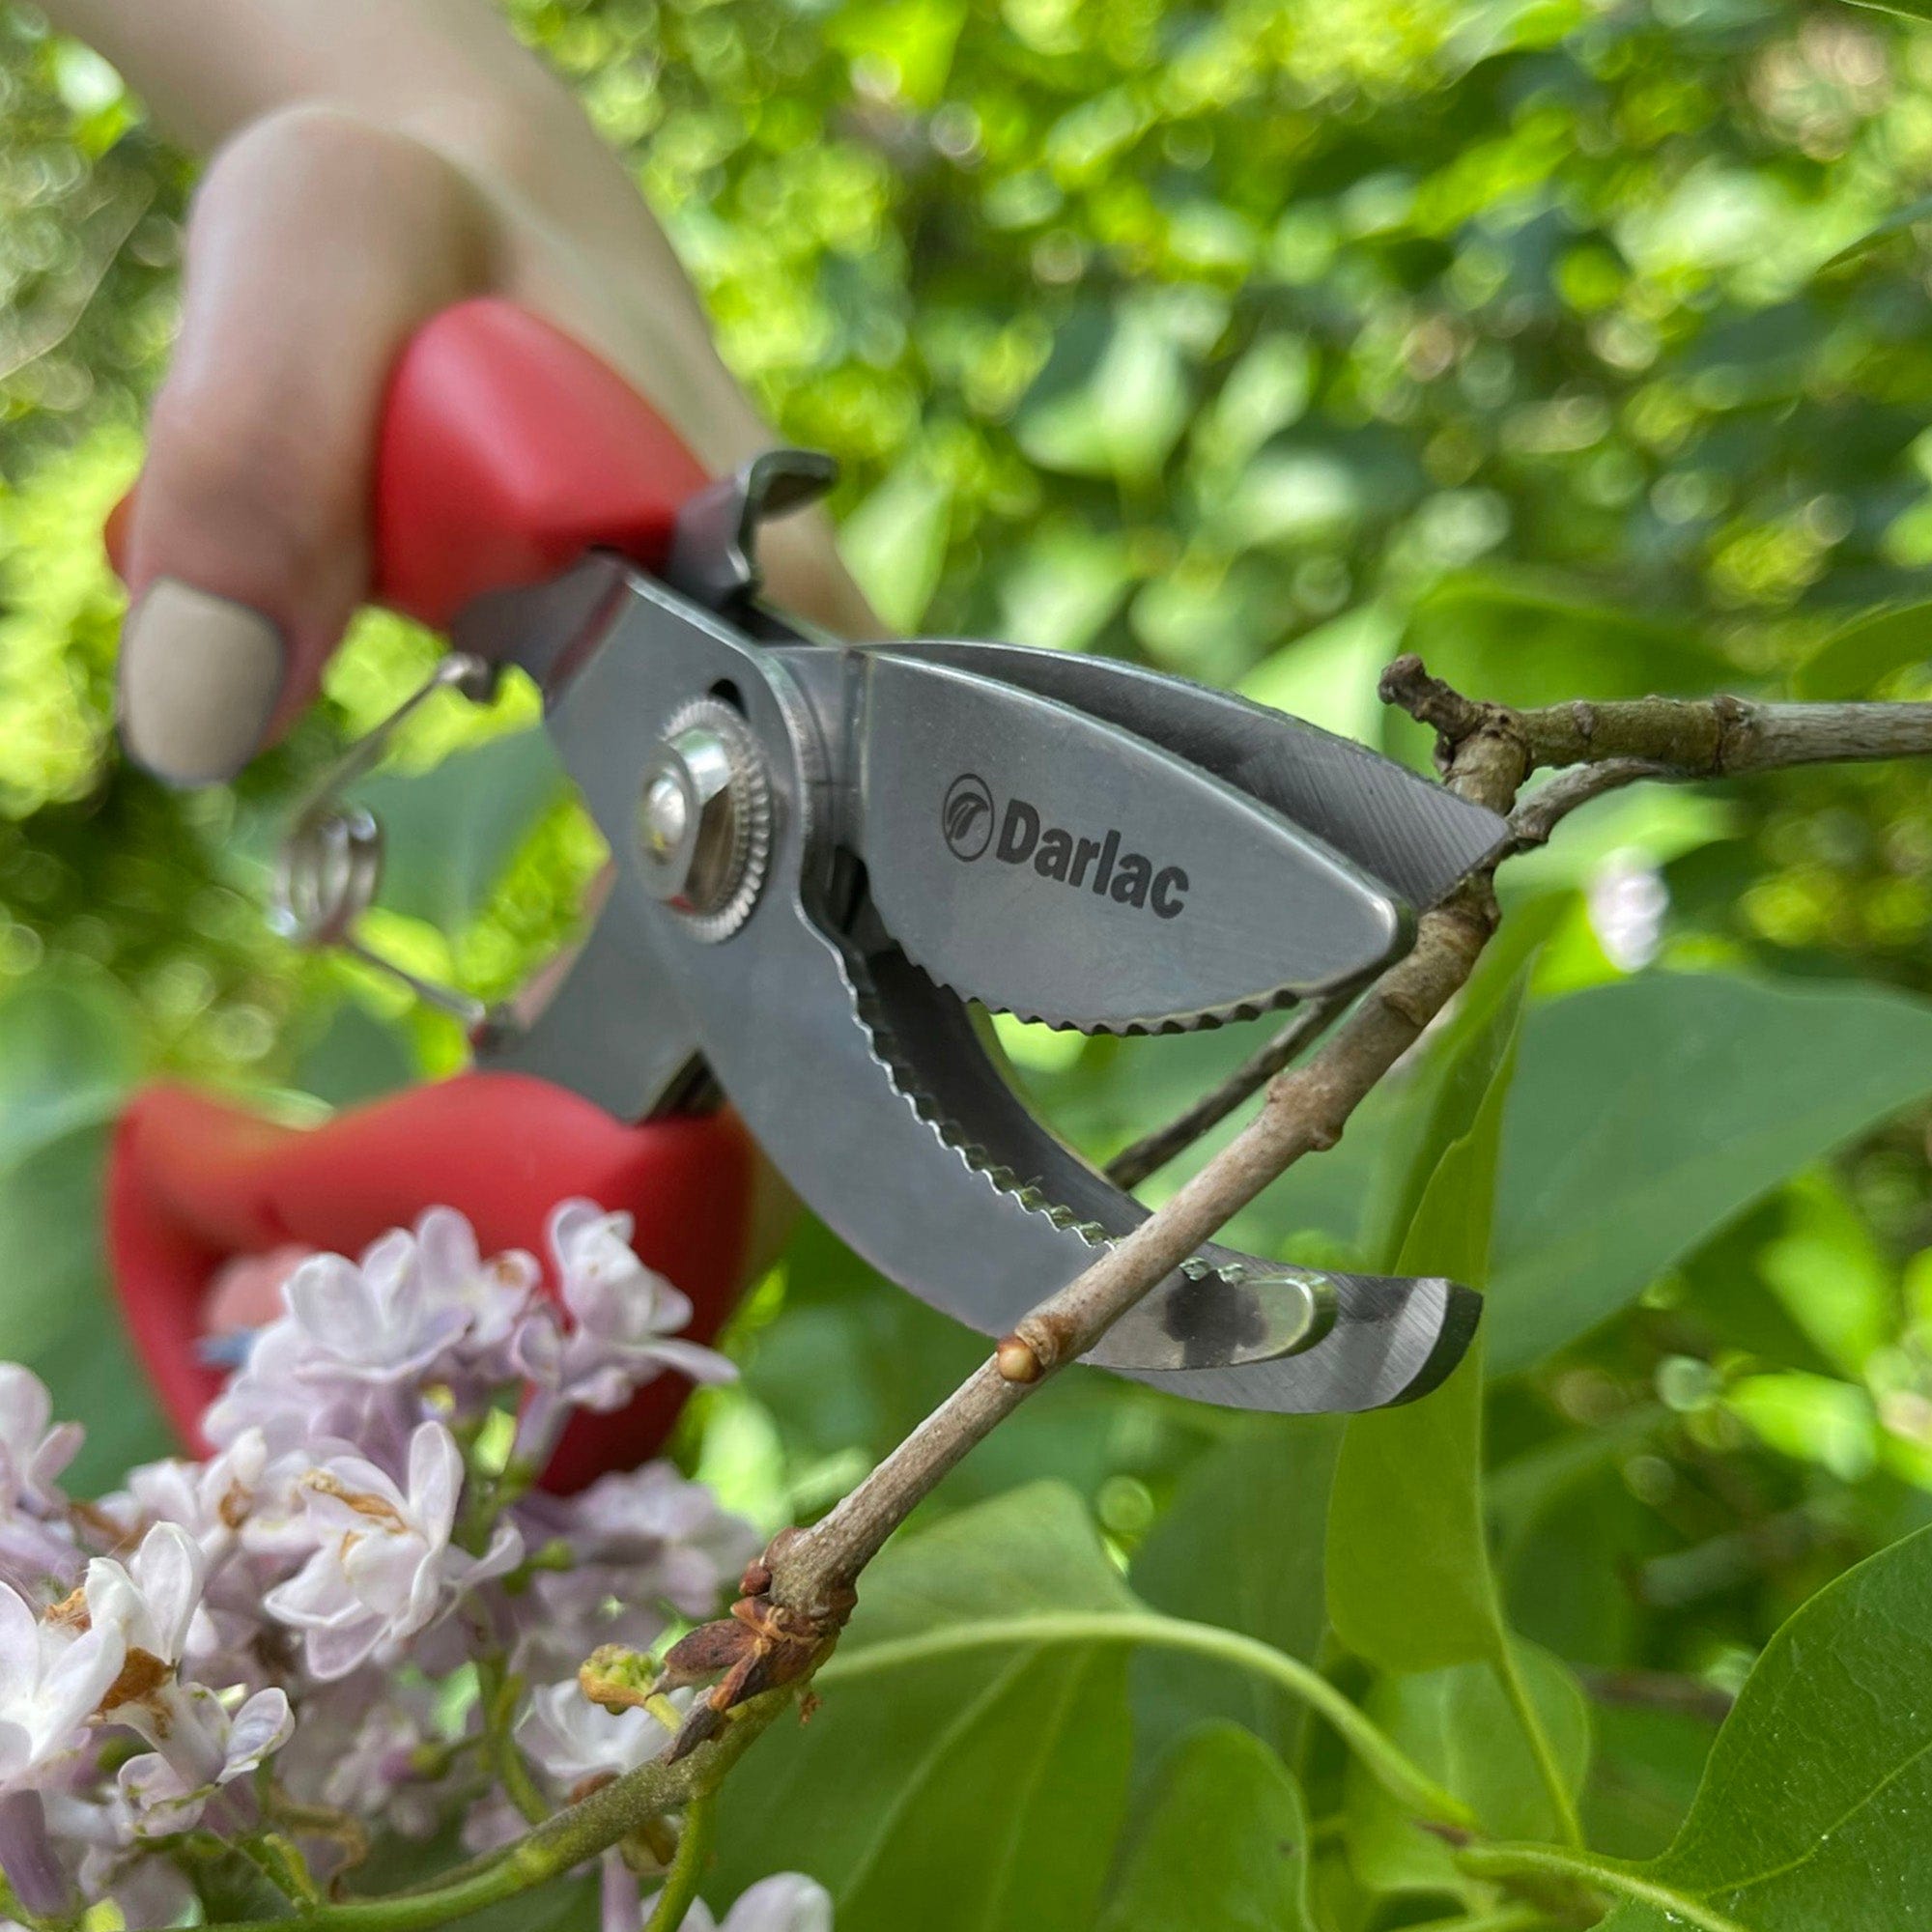 dt-brown HARDWARE Darlac Cut-n-Hold Bypass Secateurs